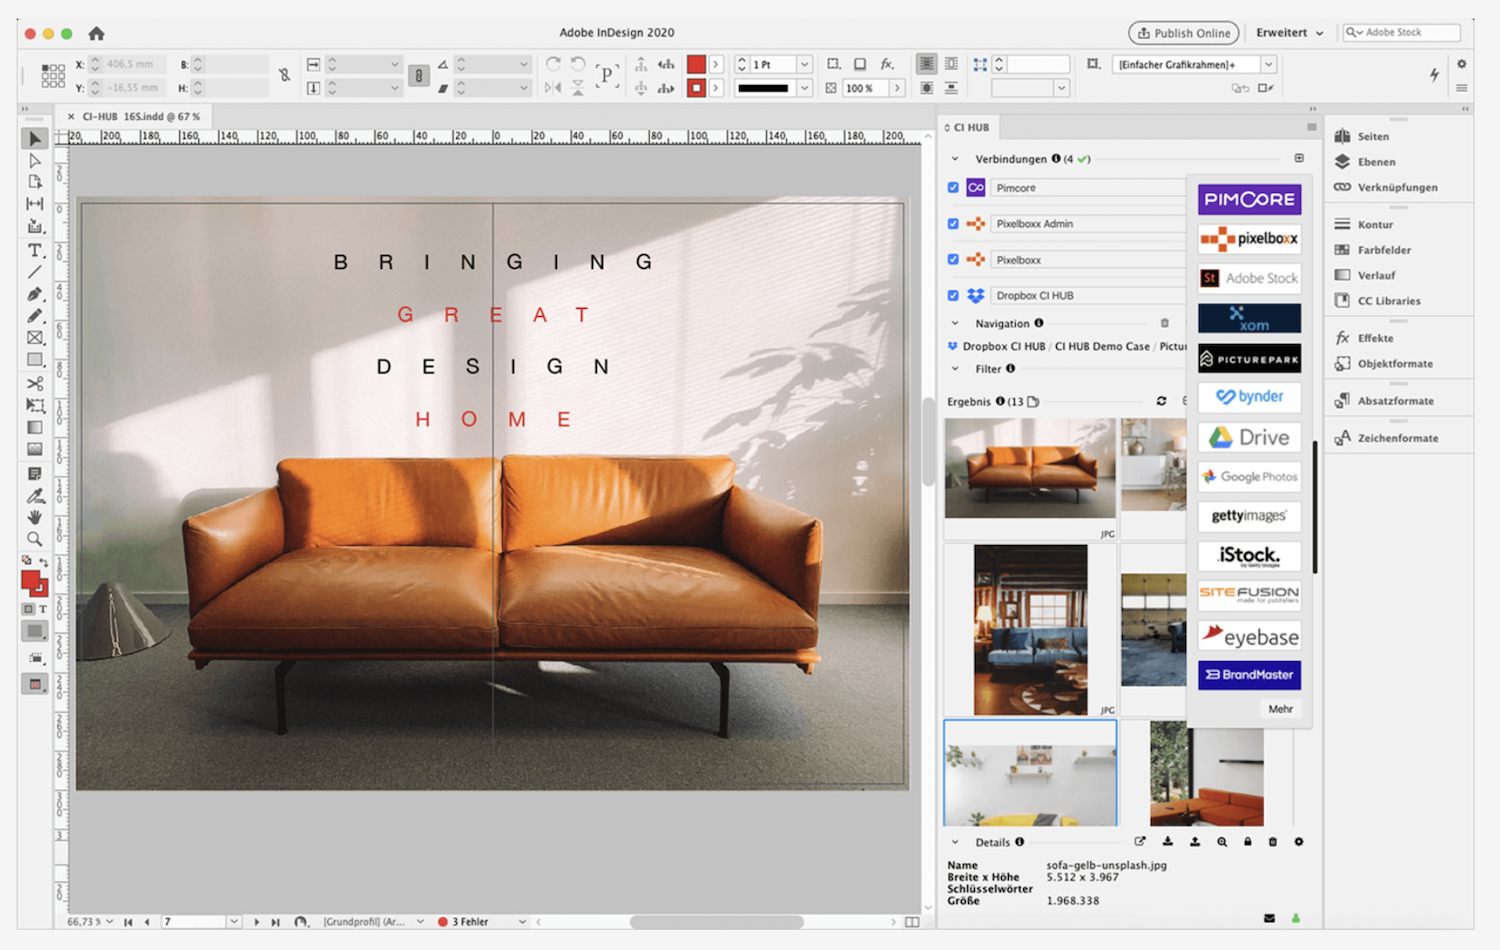 Pimcore software let users integrate the system with Adobe InDesign, the layout design application.